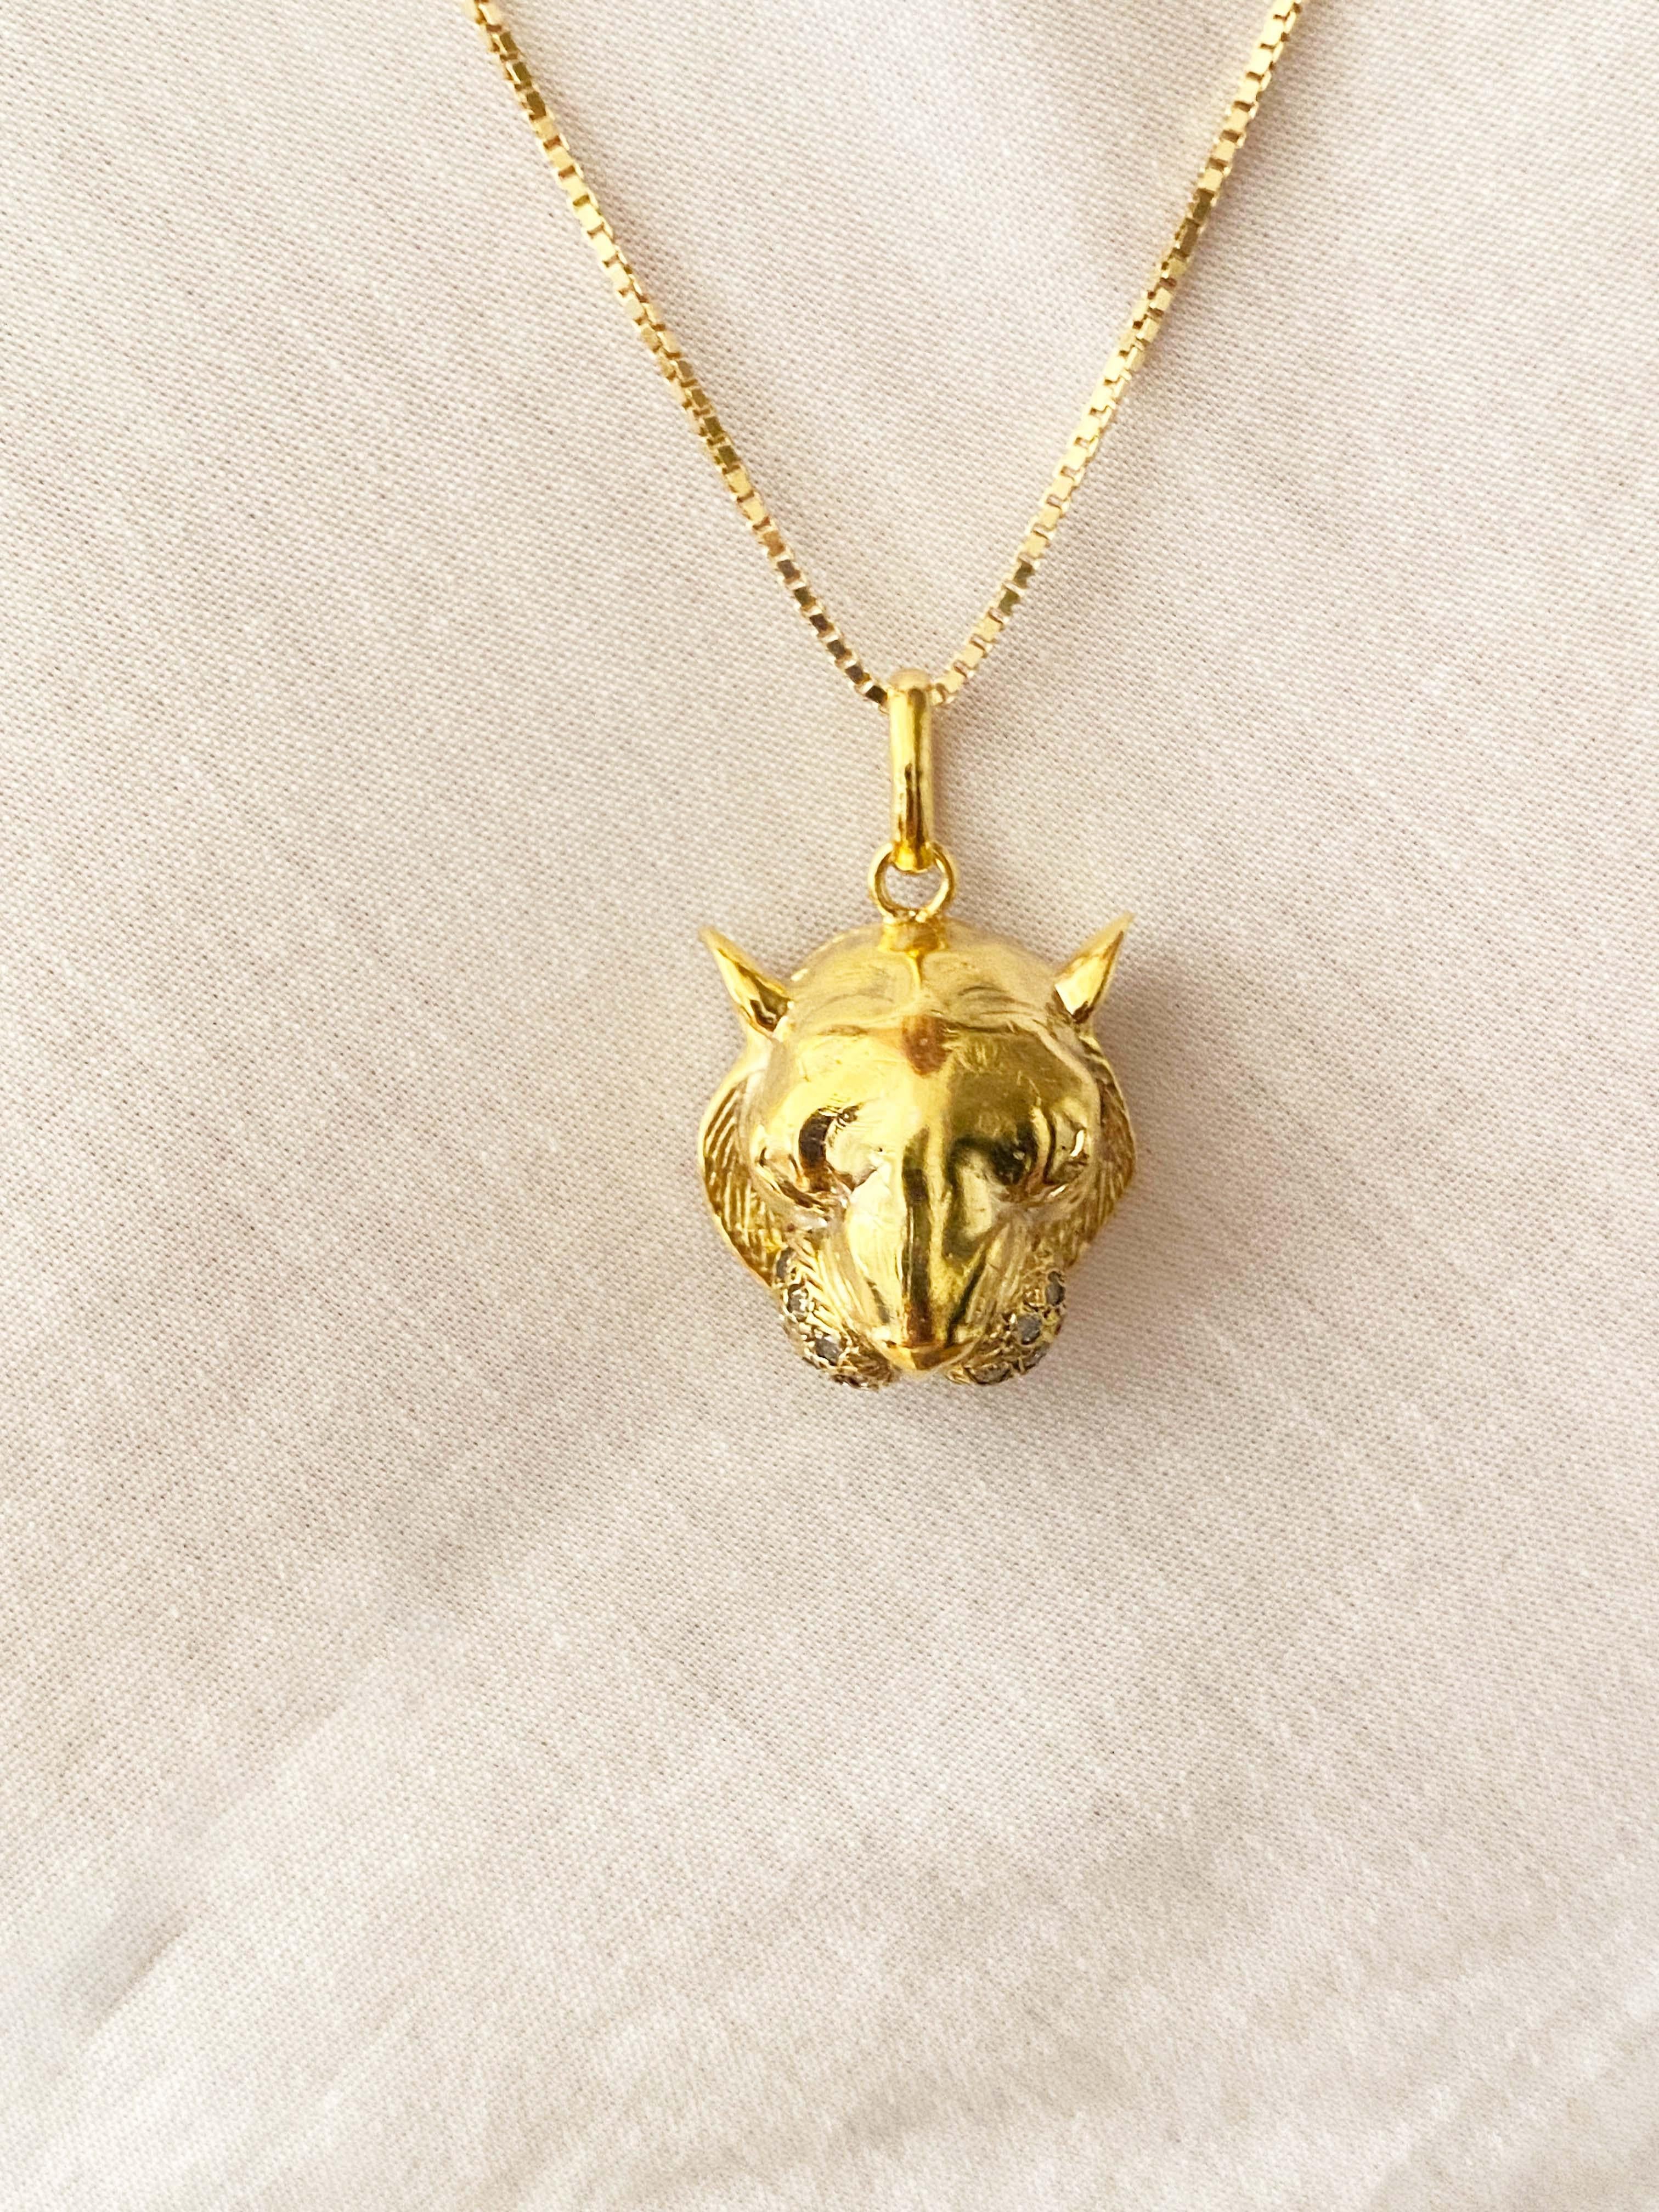 18K Gold Power Tiger Pendant Cube Chain Rubies Diamonds Handcrafted in Italy  For Sale 5